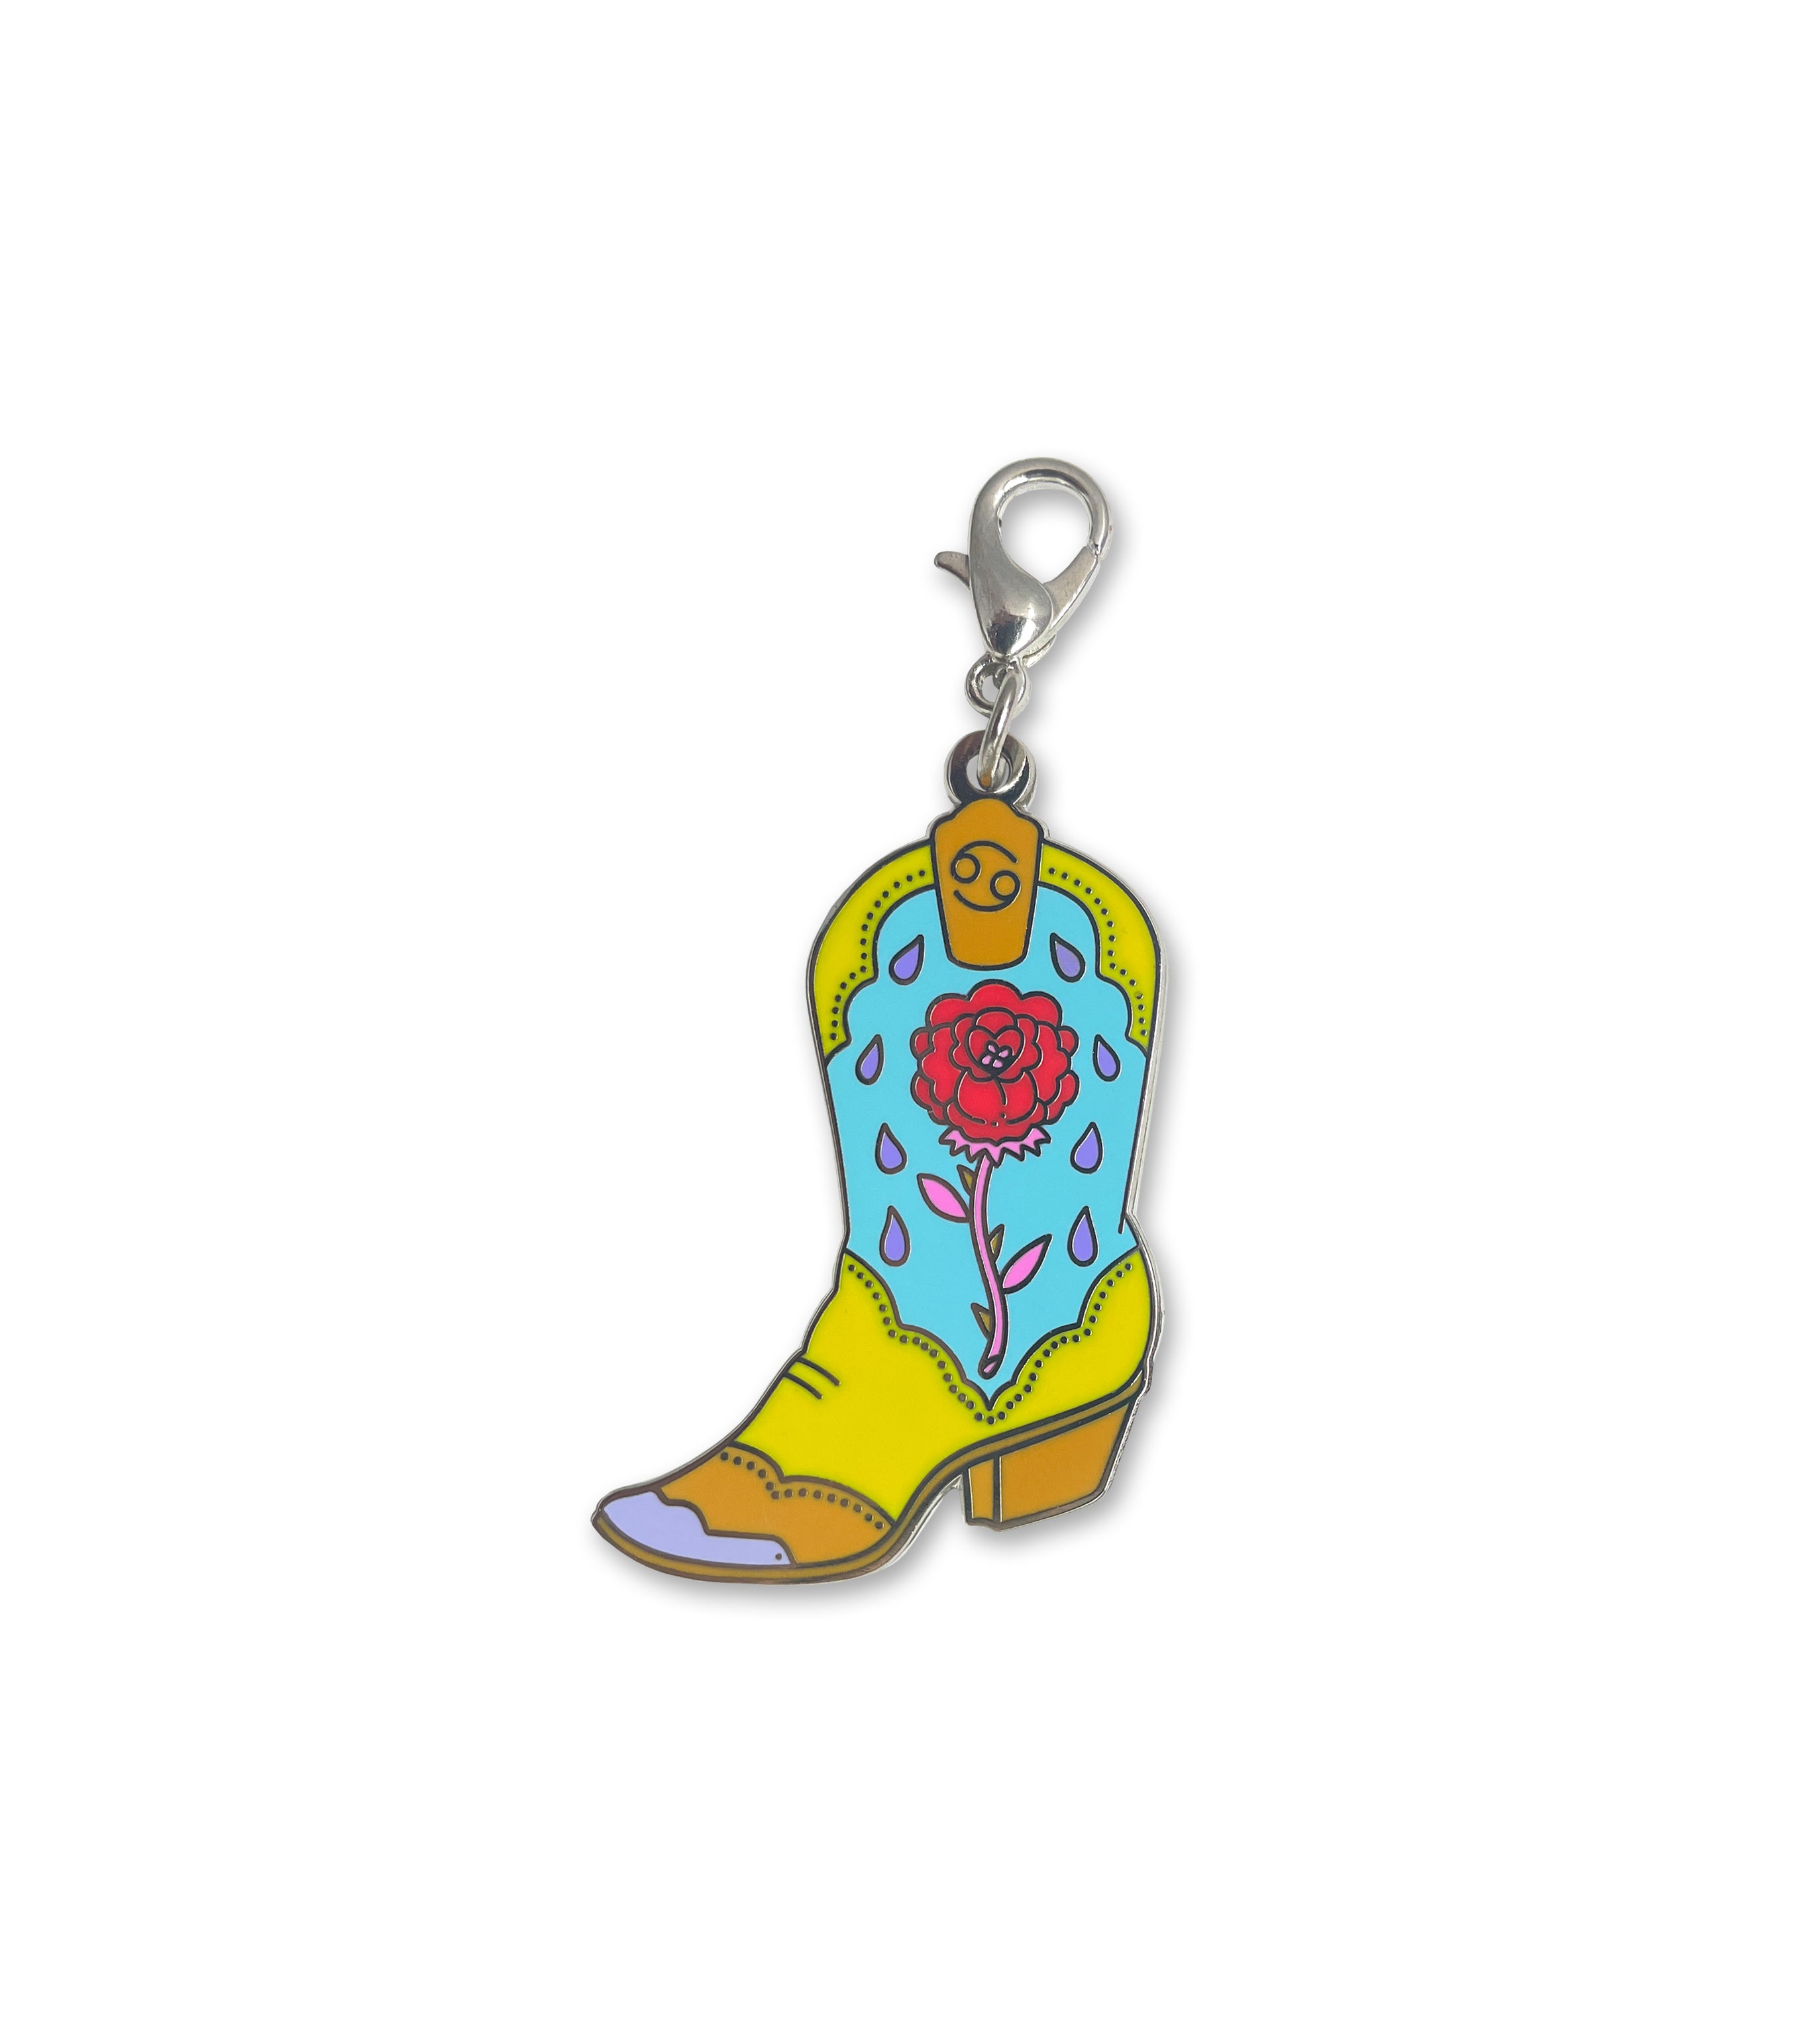 CANCER BOOT enamel pin or charm